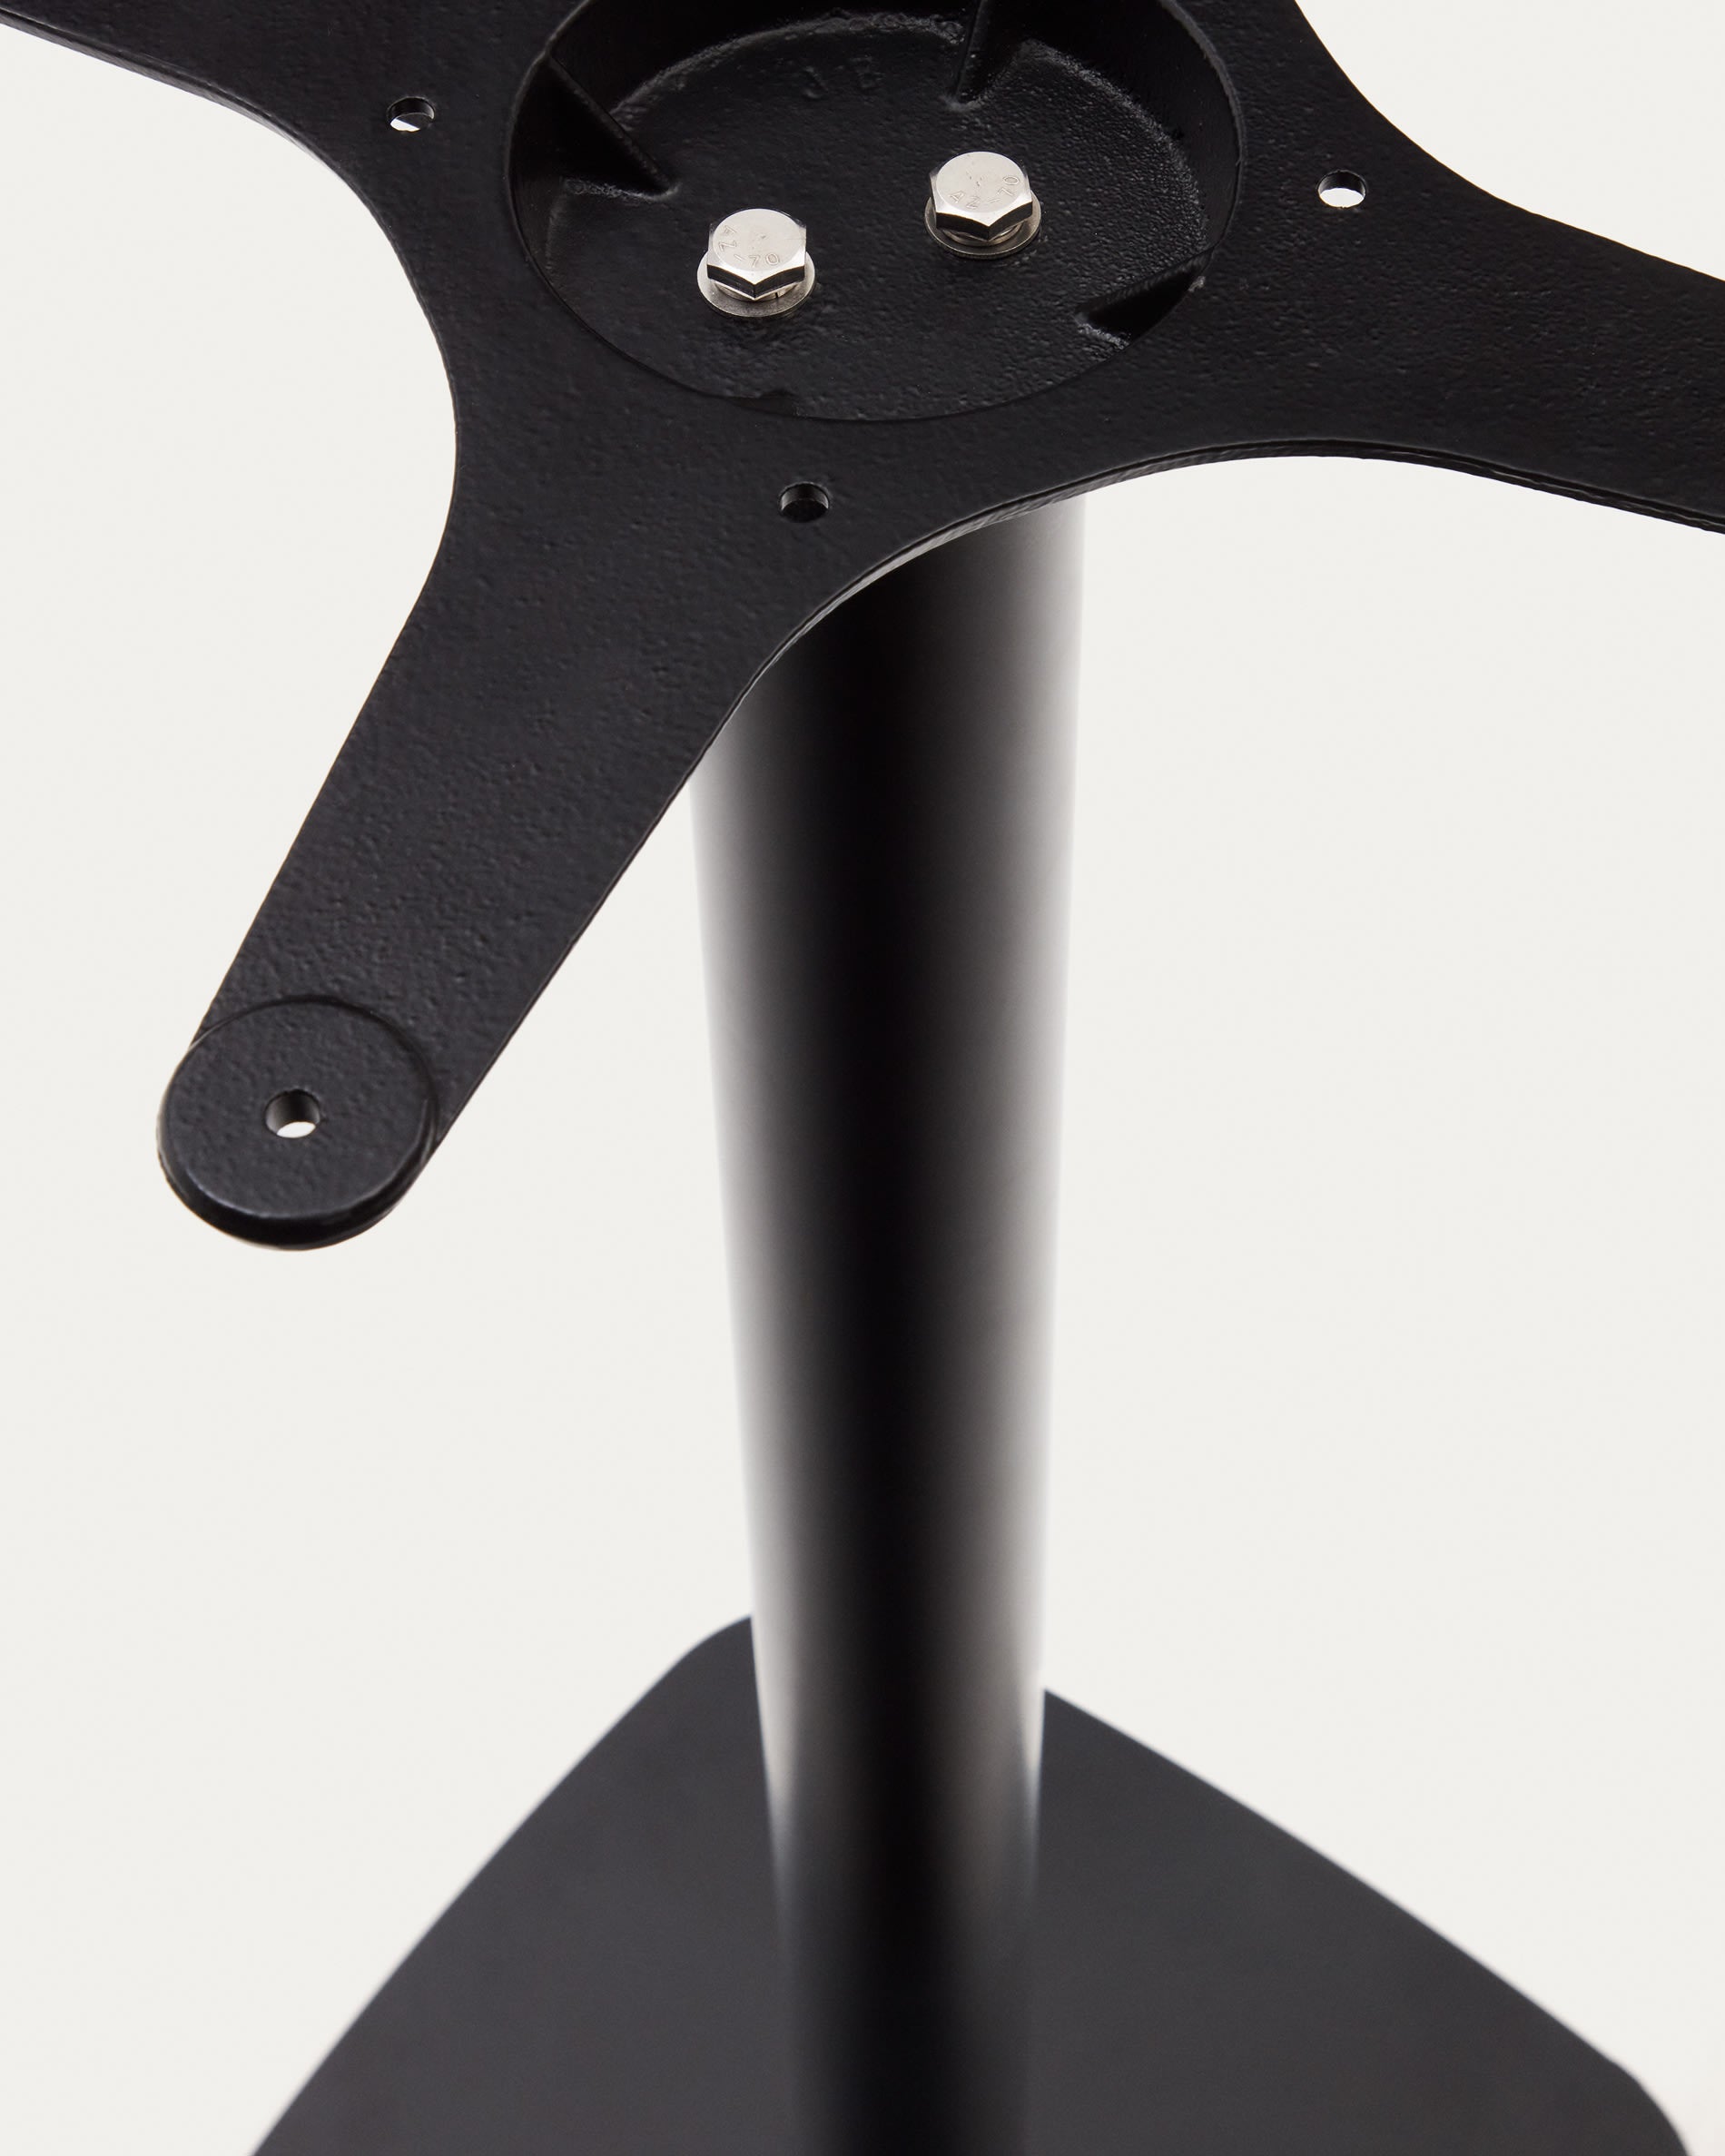 Dina bar-table leg with square metal base in a painted black finish